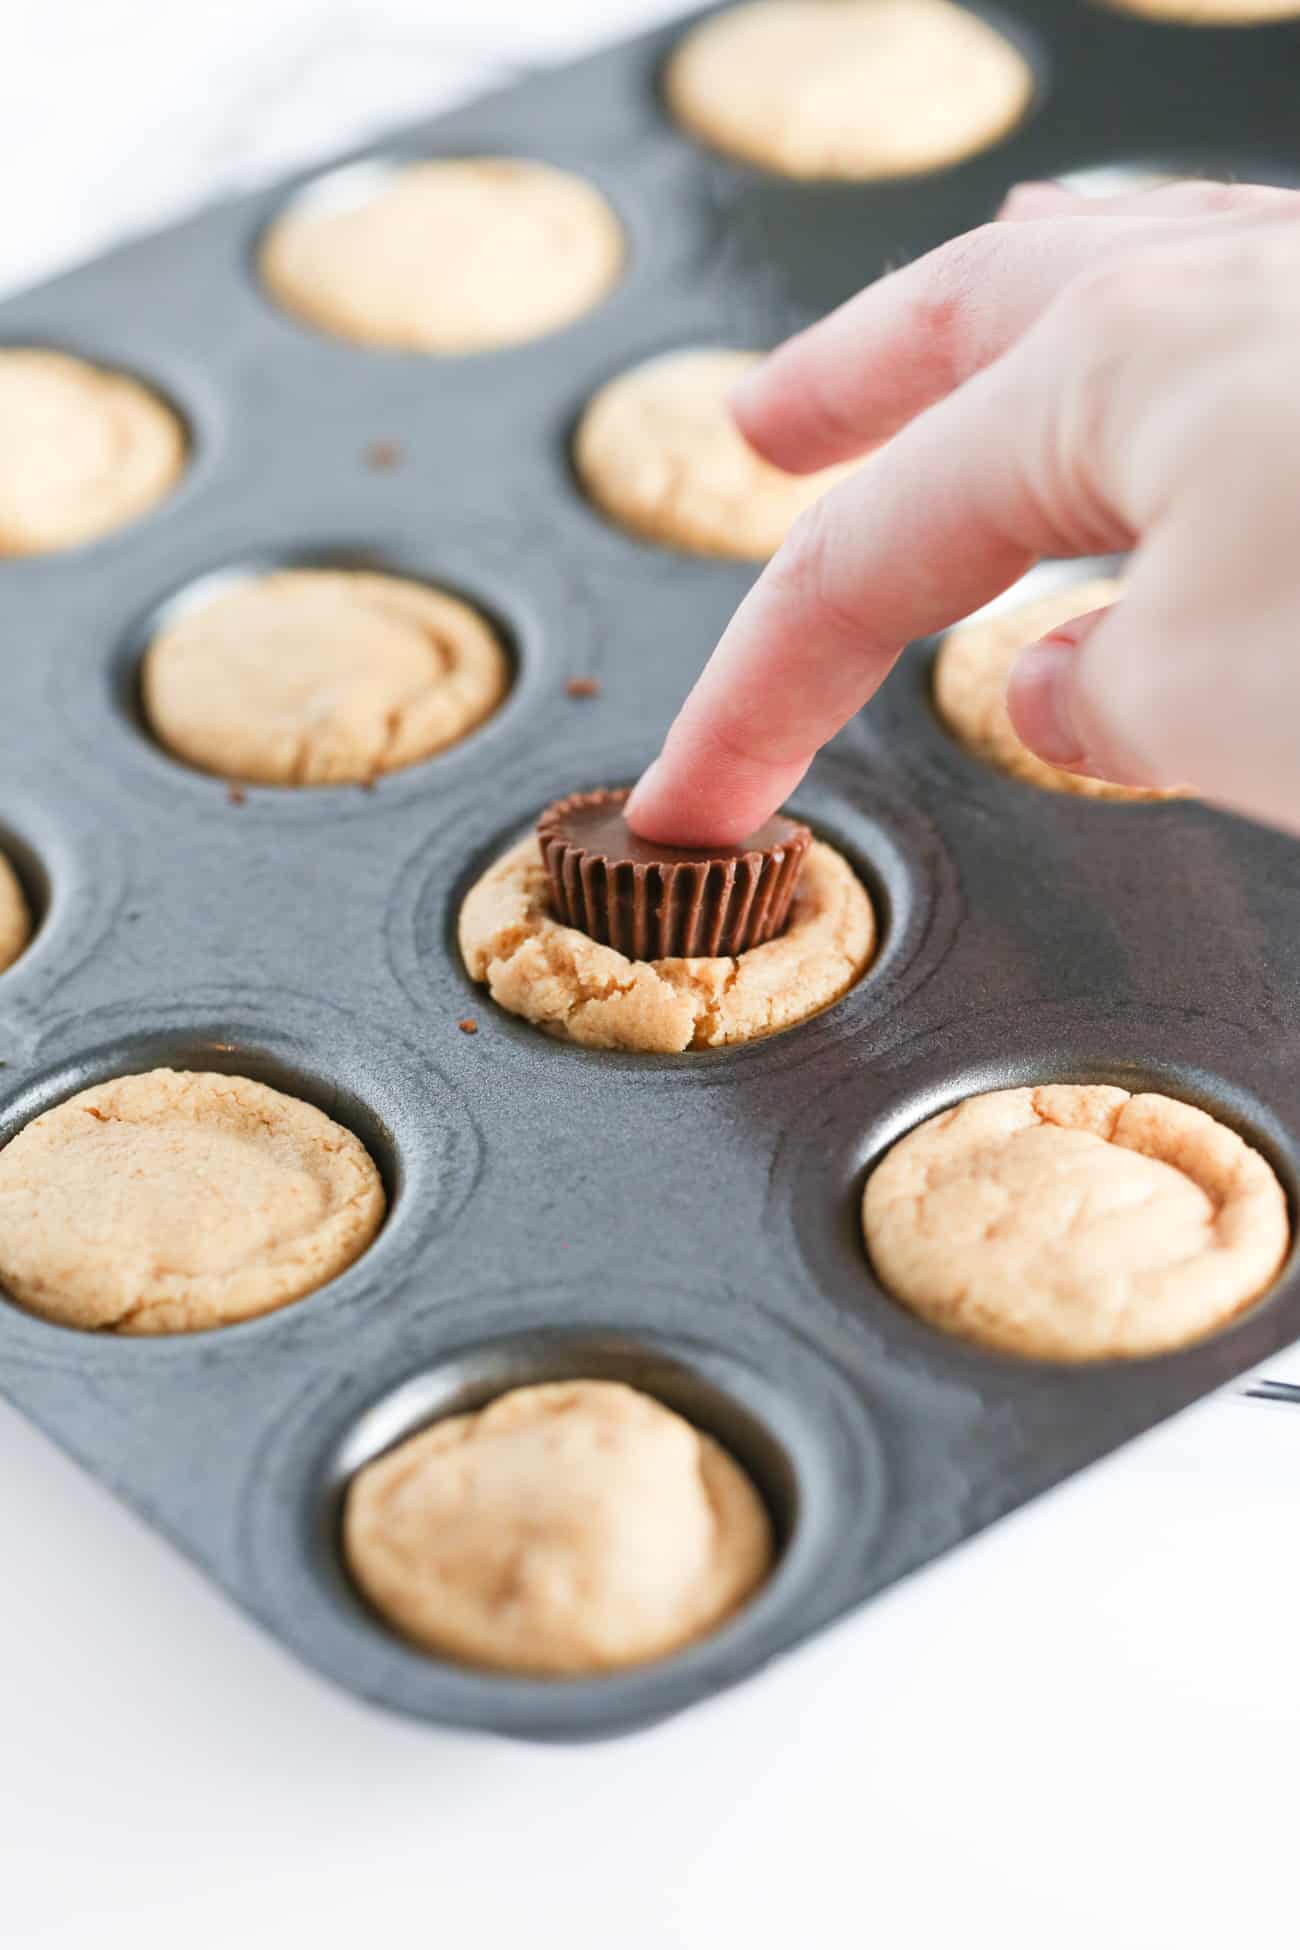 Finger pressing mini Reeses peanut butter cup into cookie muffin to make easy Christmas holly cookie cups!